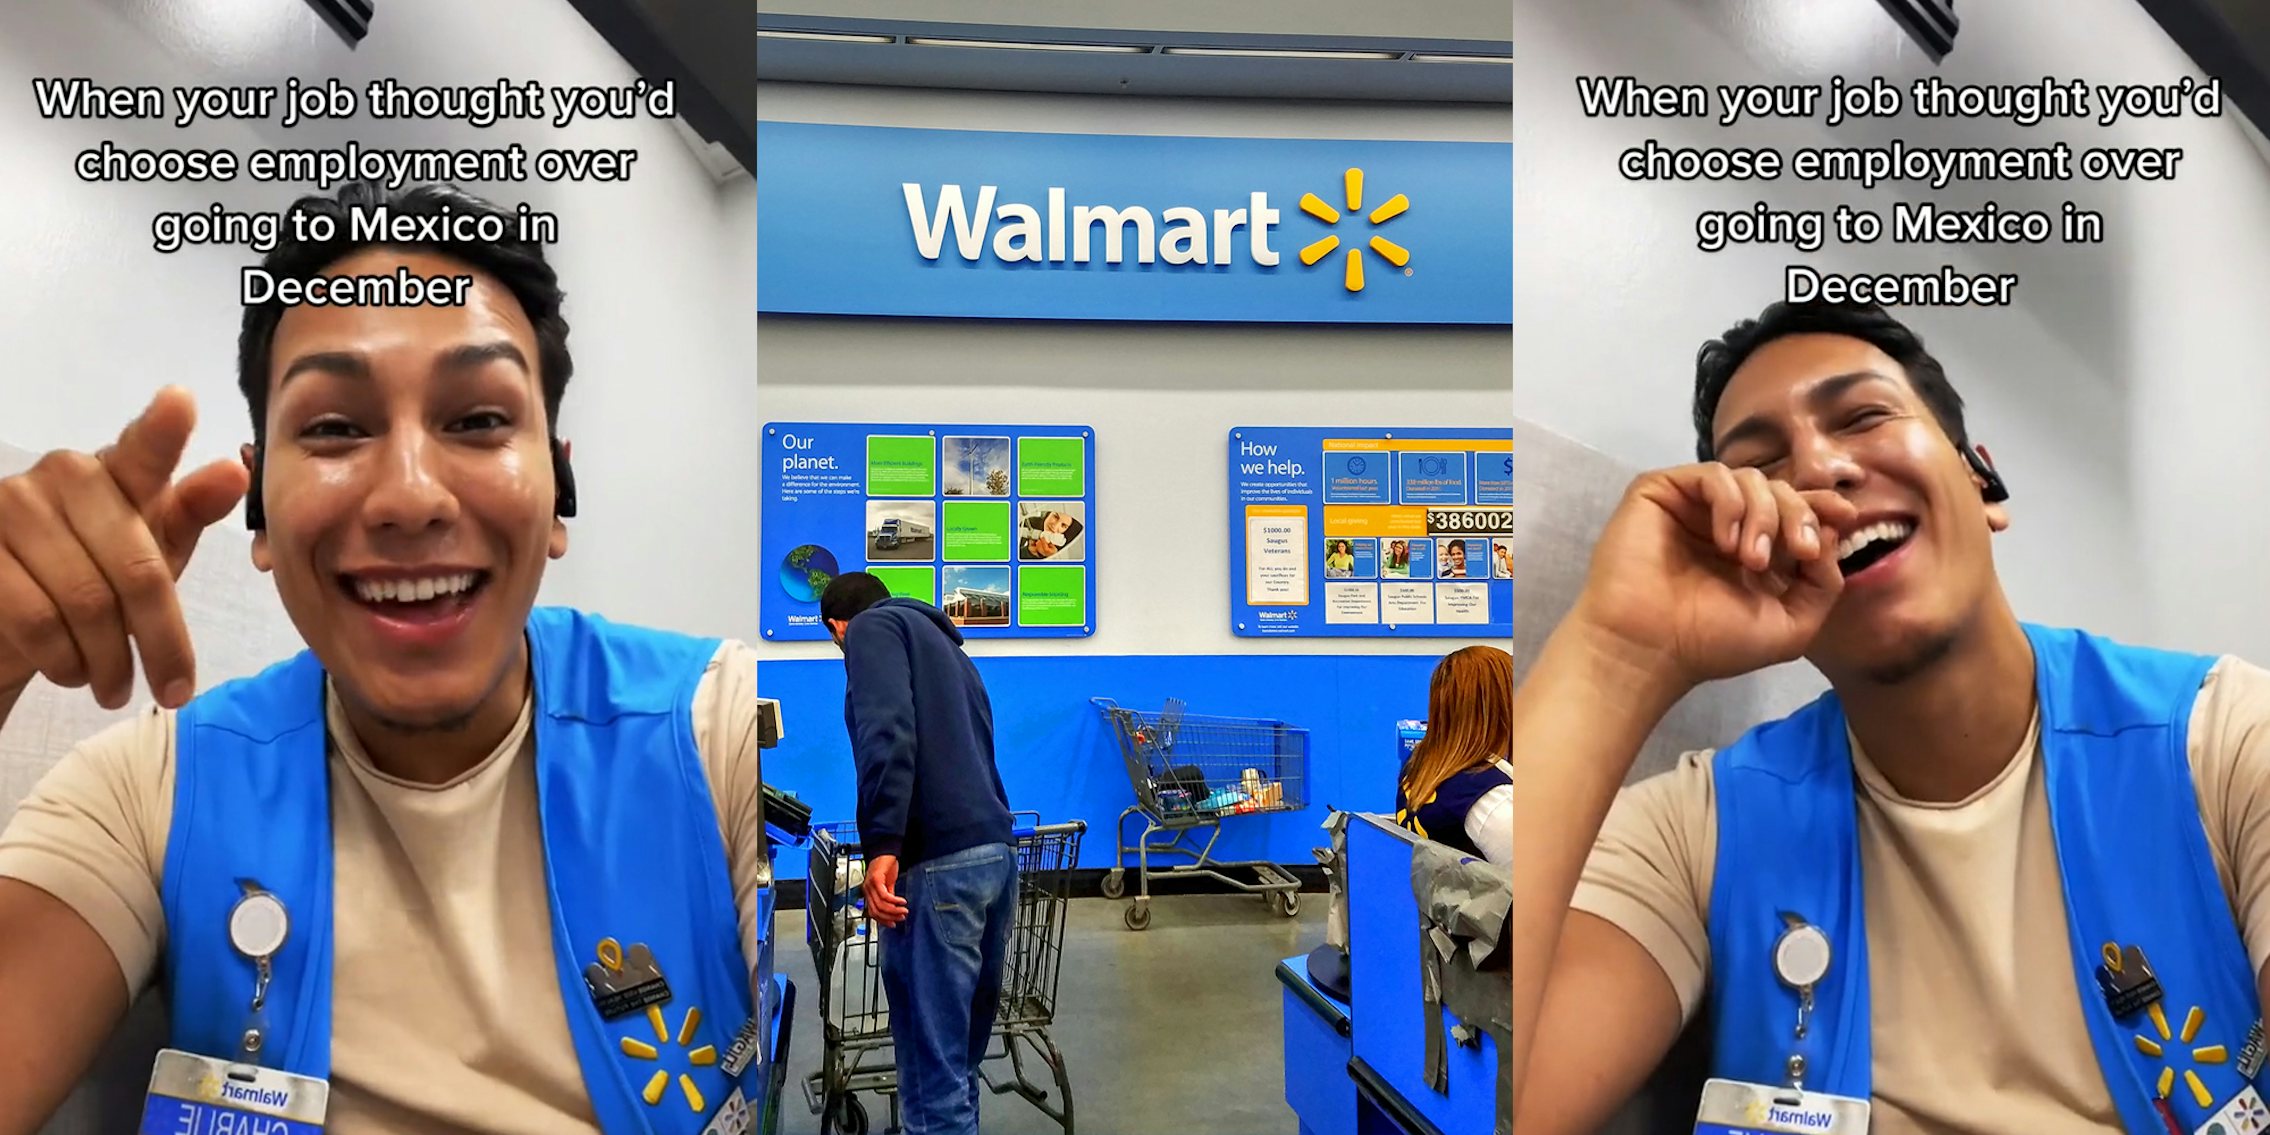 Walmart worker speaking pointing to camera caption 'When your job thought you'd choose employment over going to Mexico in December' (l) Walmart interior checkout with sign 'Walmart' (c) Walmart worker laughing caption 'When your job thought you'd choose employment over going to Mexico in December' (r)